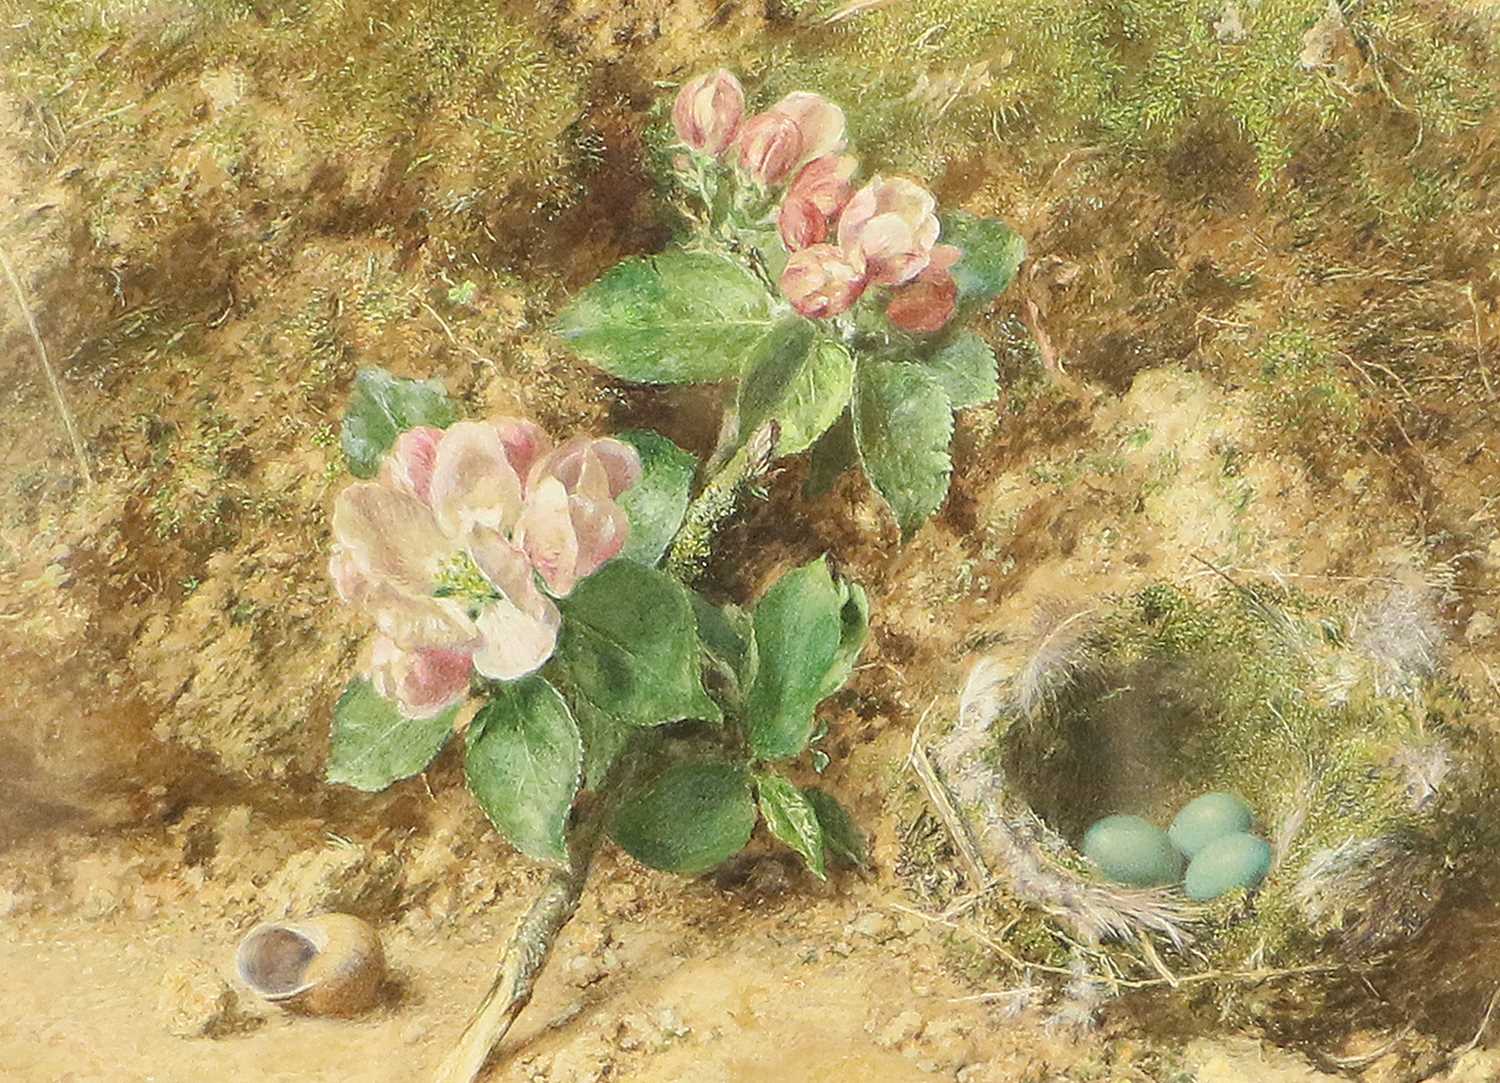 William Henry Hunt OWS (1790-1864) A sprig of blossom, a snail's shell, and a bird's nest on a mossy